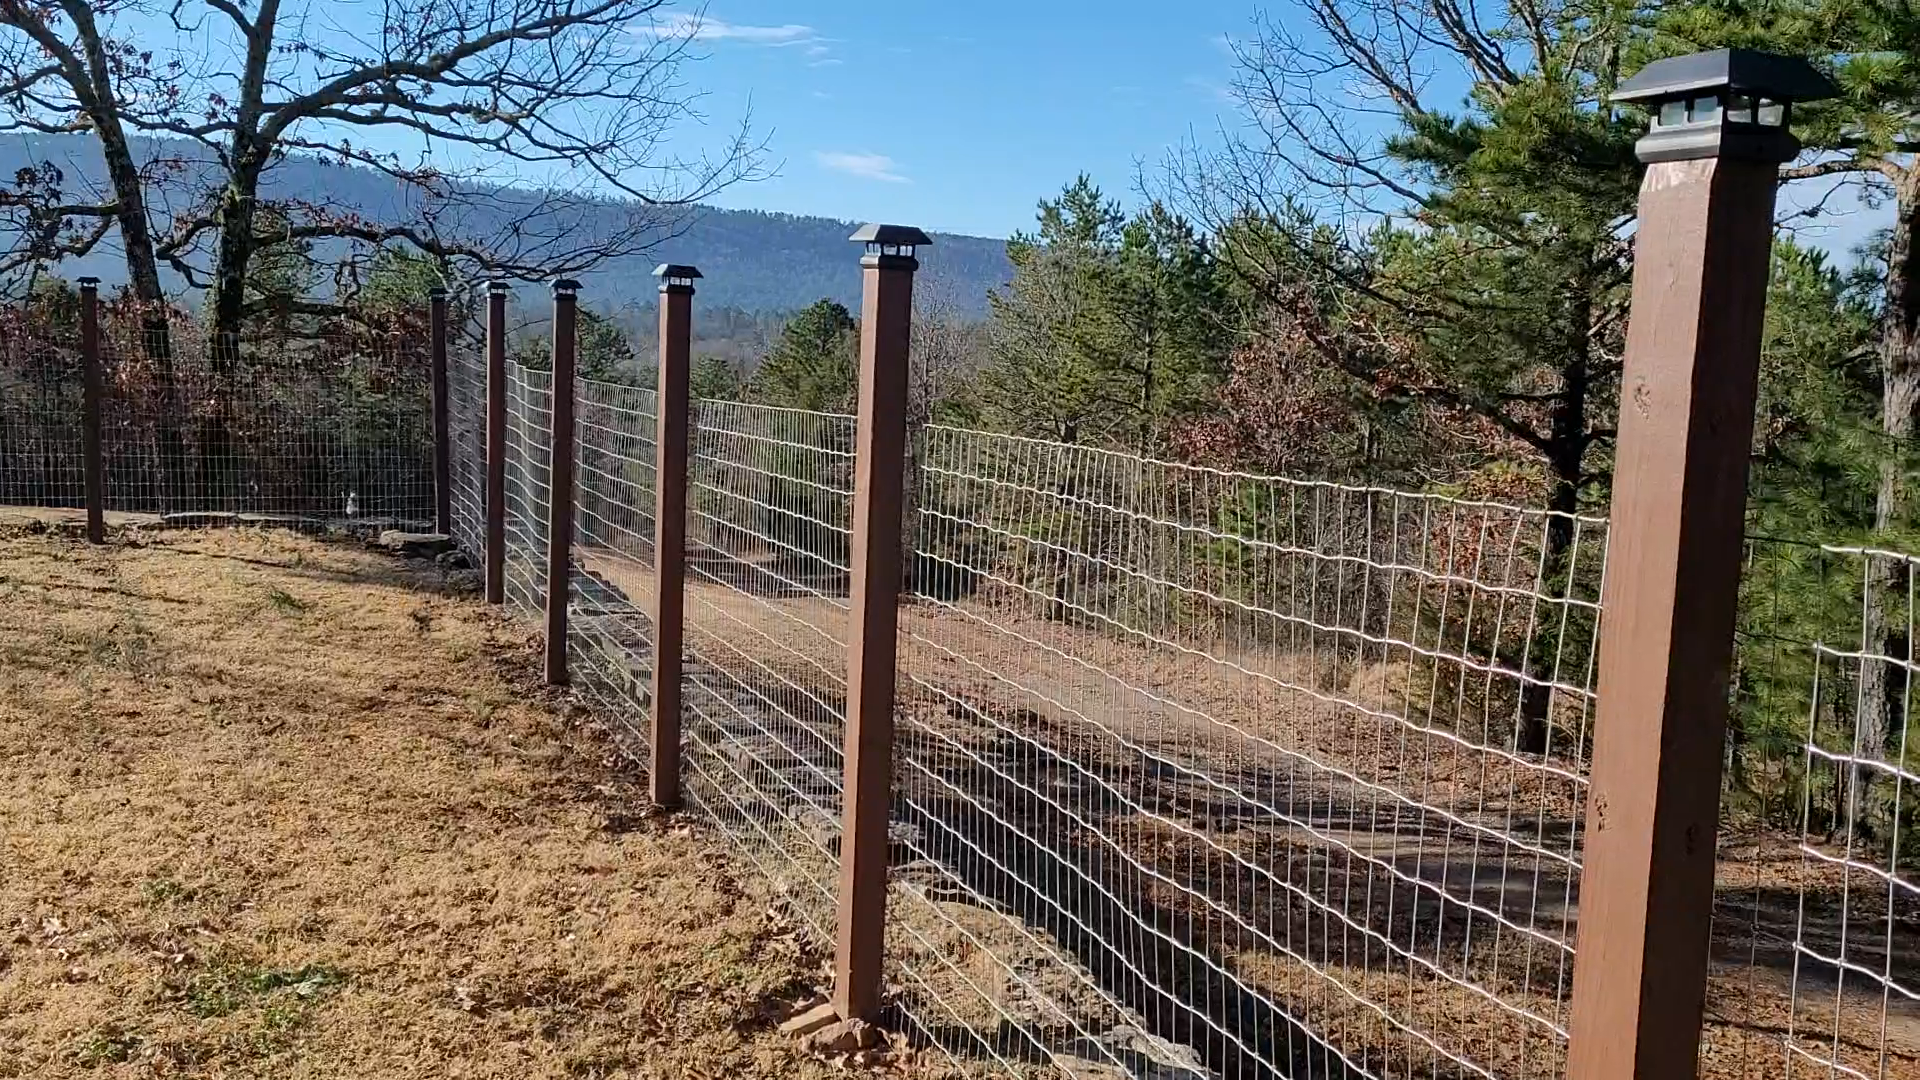 DIY Front Yard Fence Project Using 4x4s and Stretch Woven Wire — Healing Moon Farm and Soapery